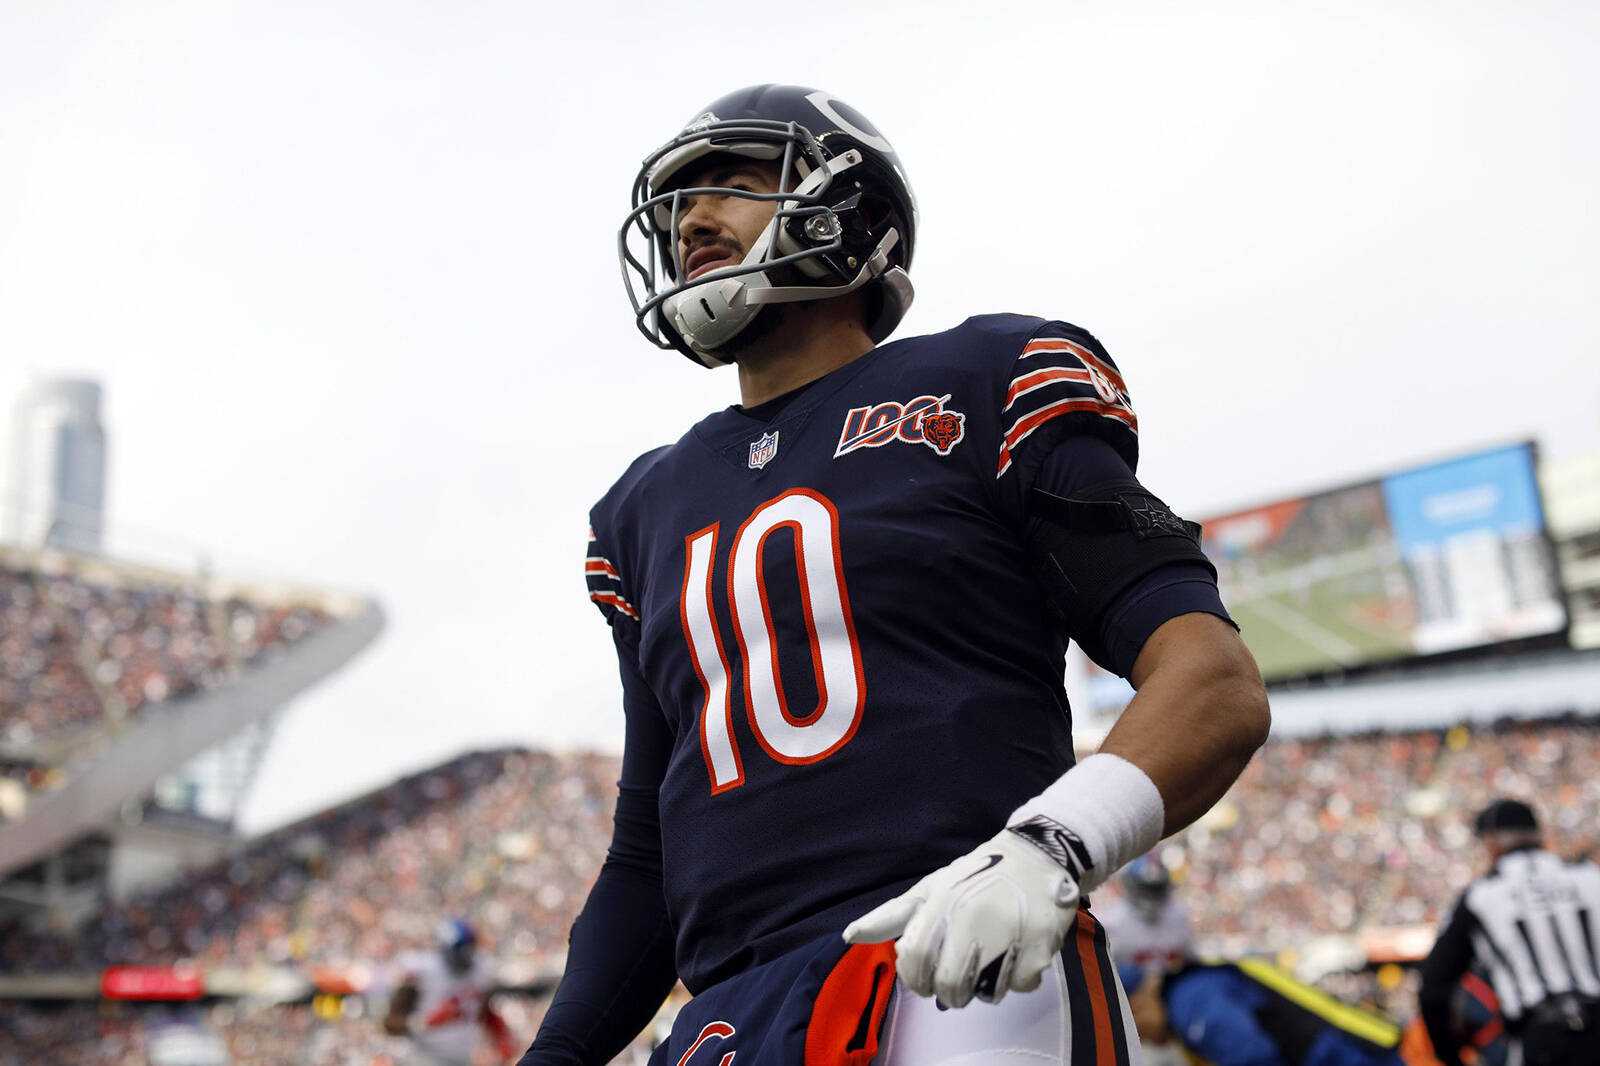 June 15, 2020, USA: Chicago Bears quarterback Mitch Trubisky on Nov. 24, 2019, at Soldier Field in Chicago, Ill. USA - Z